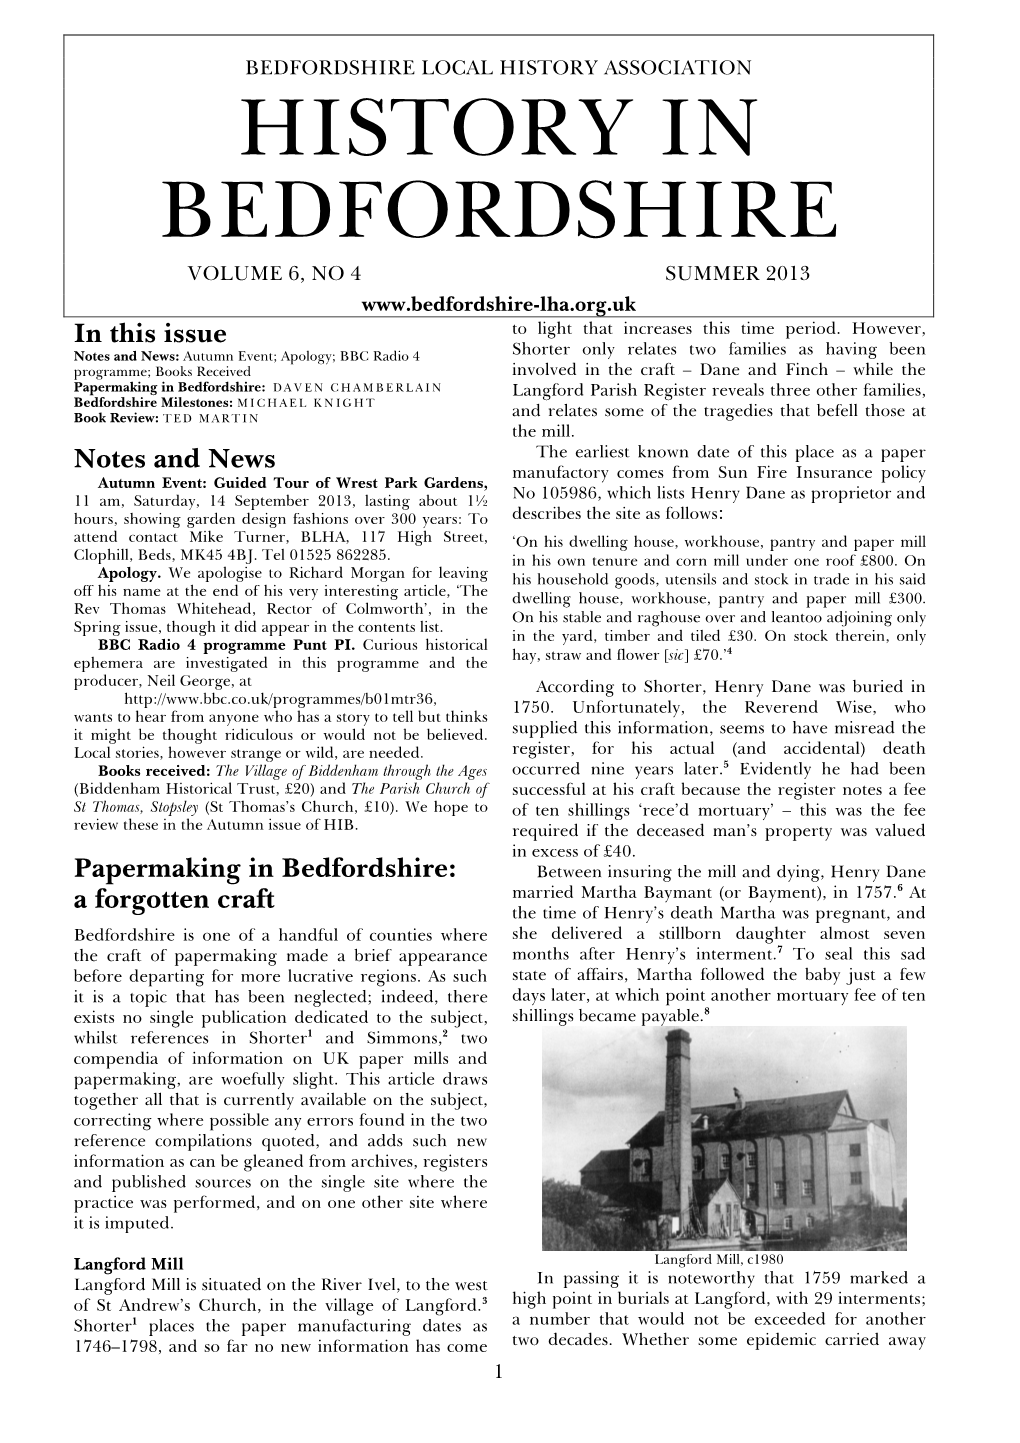 History in Bedfordshire Volume 6, No 4 Summer 2013